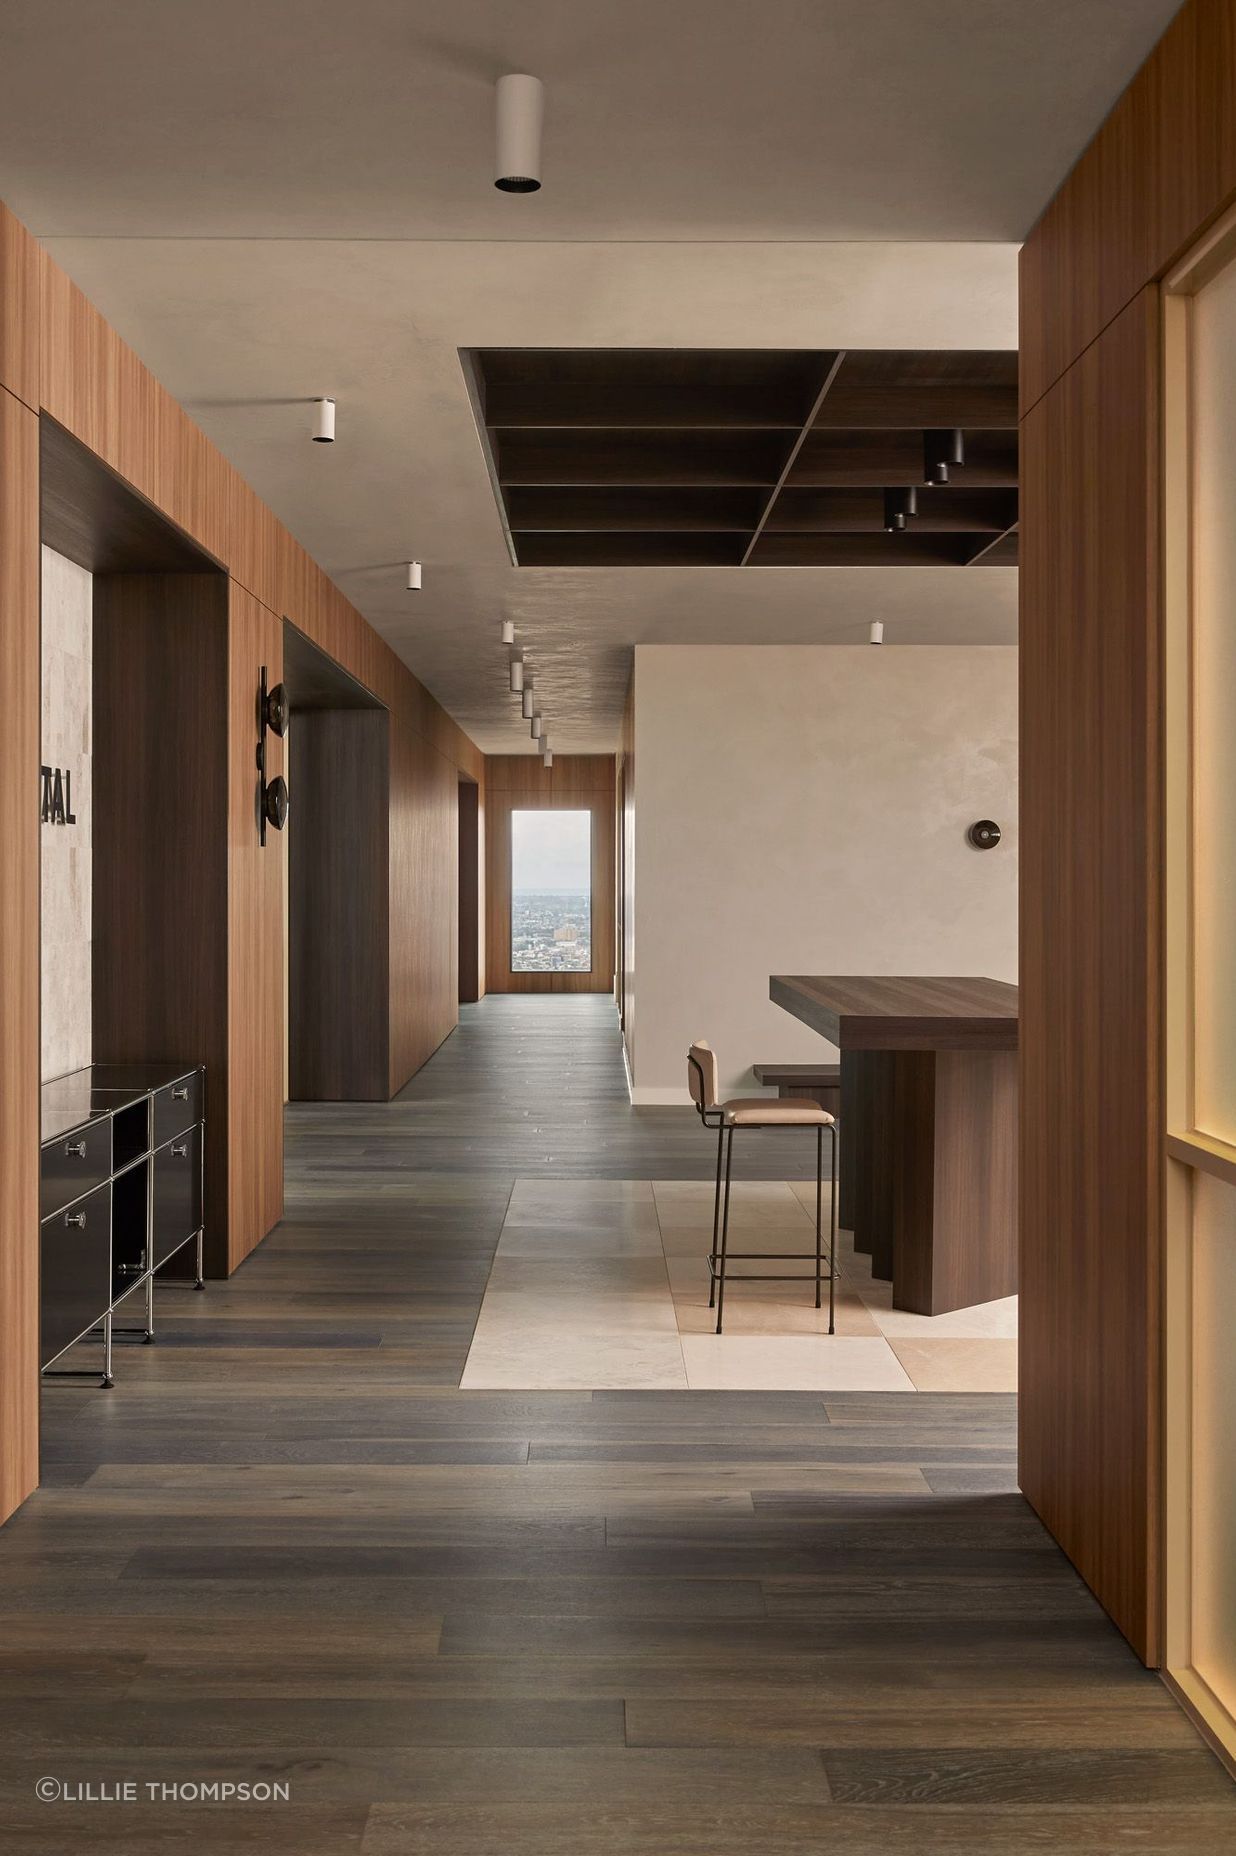 Contrasting timber tones add interest to the muted palette.